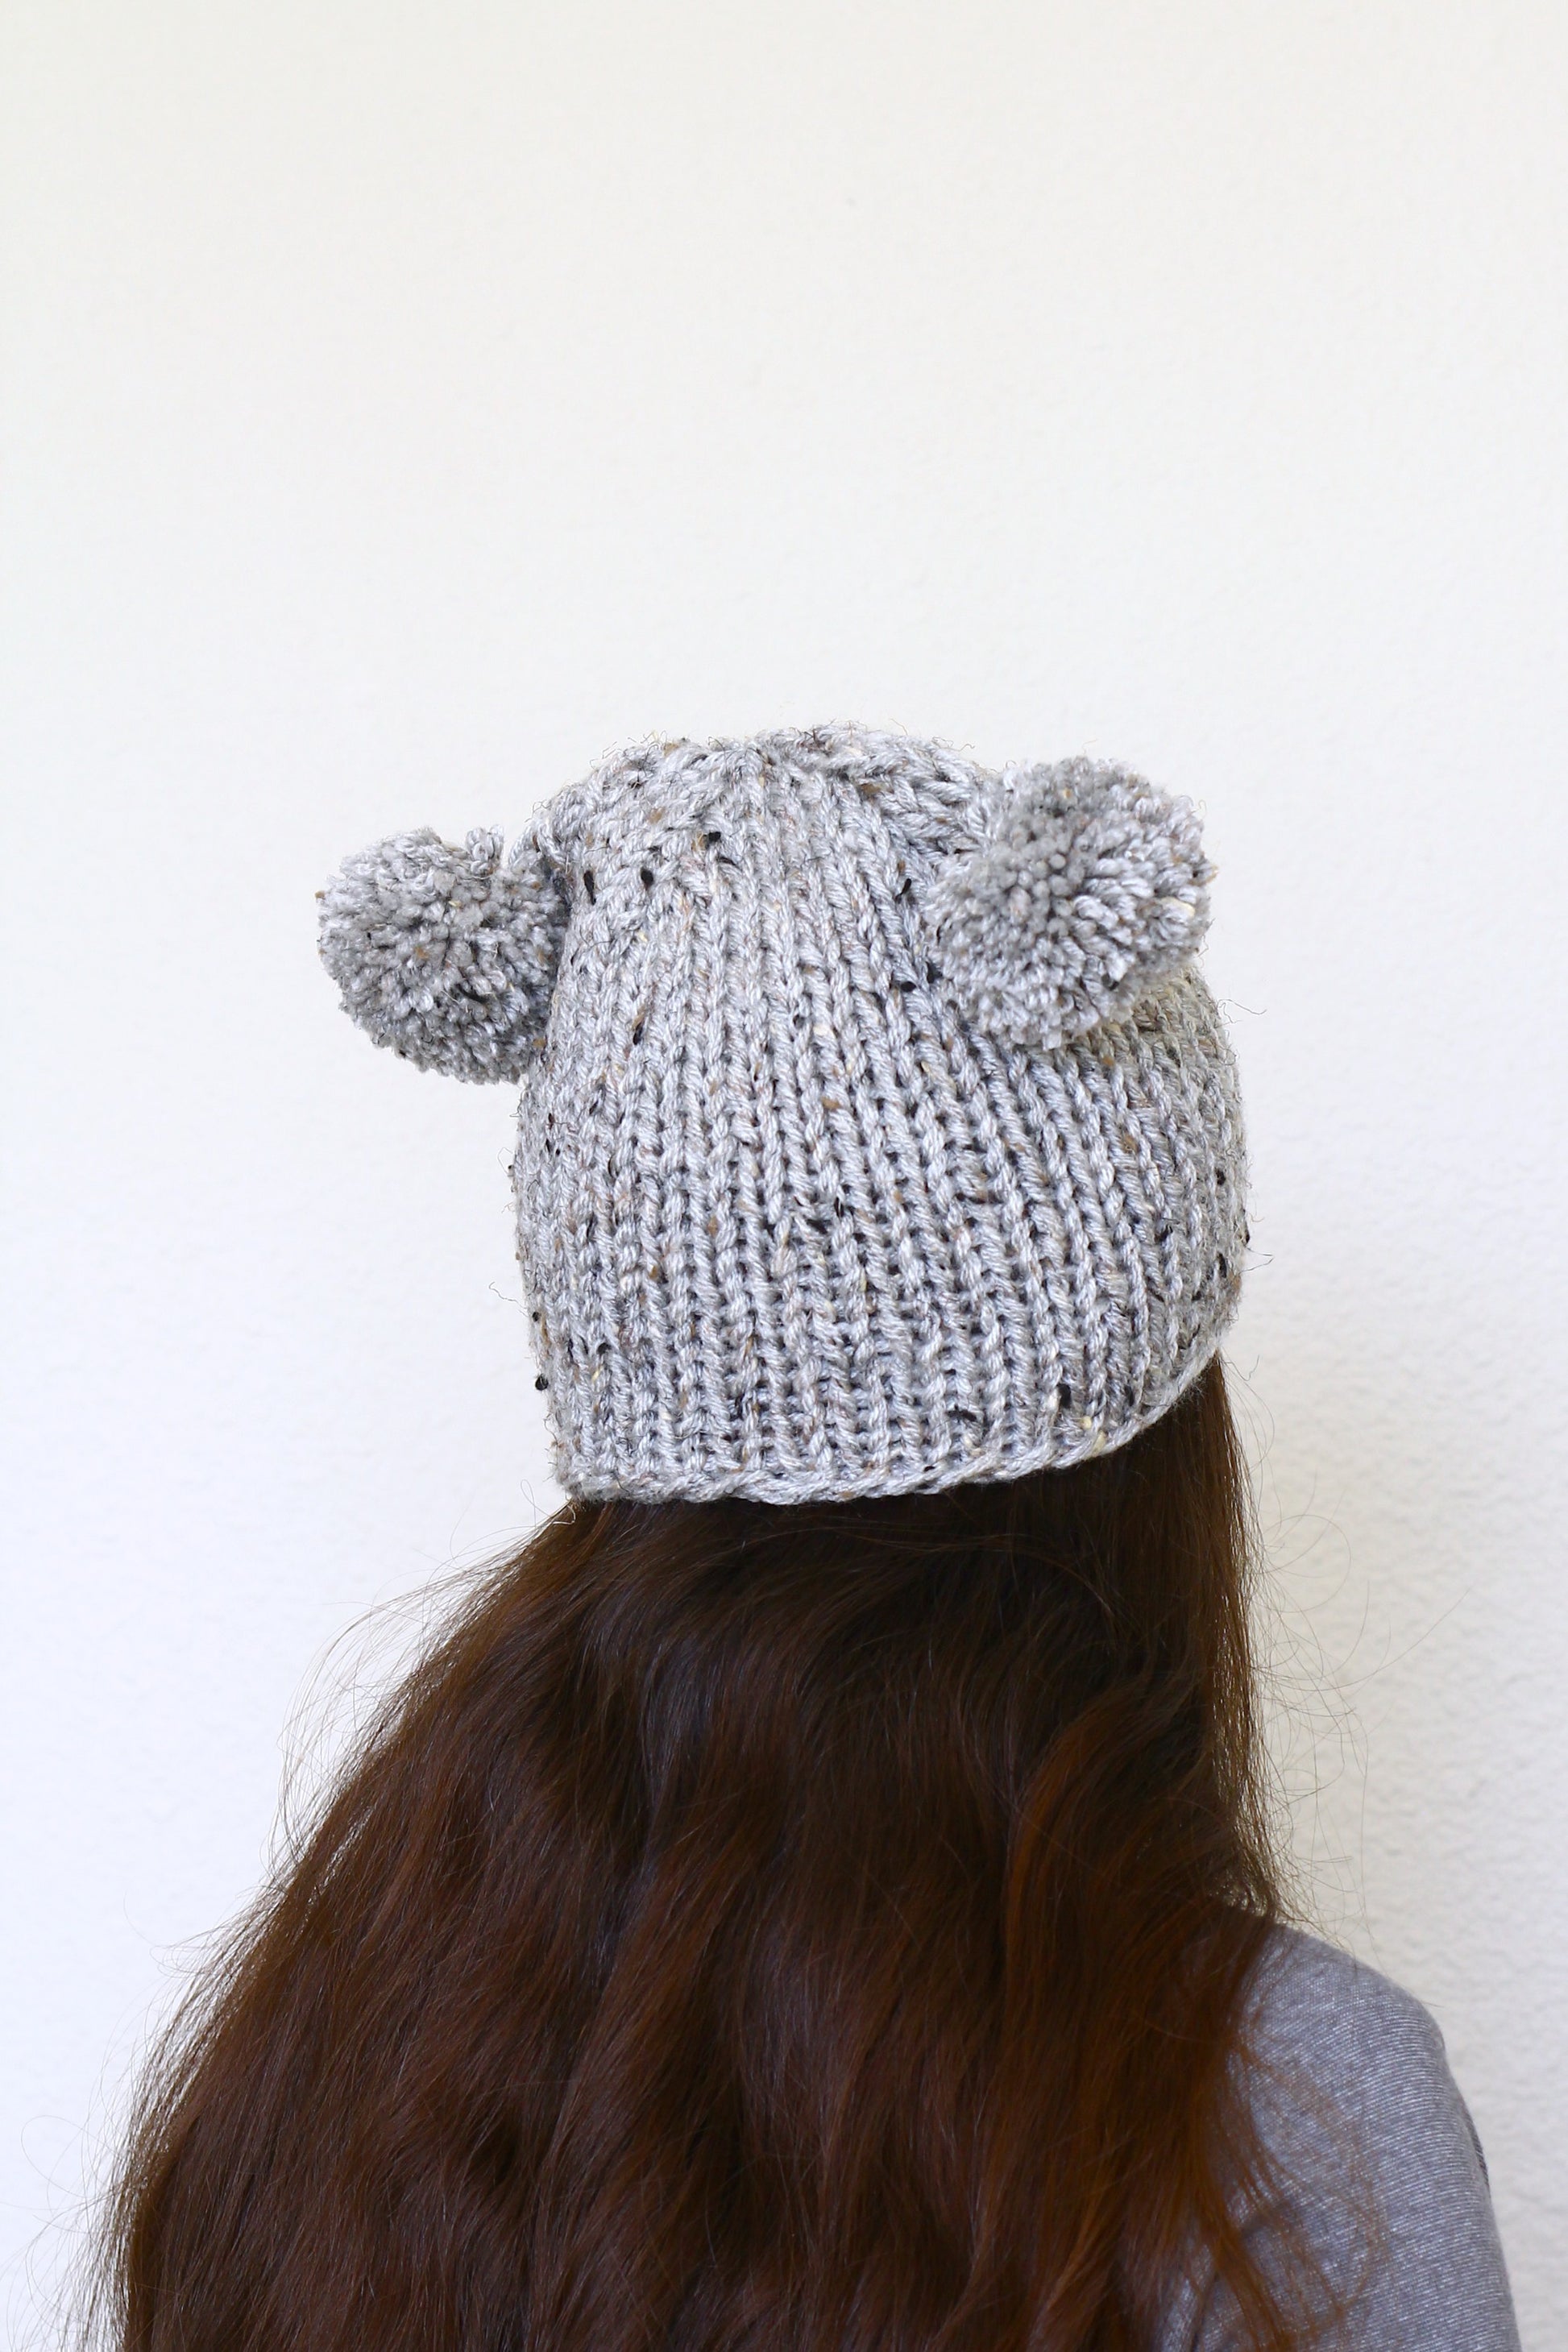 Knit hat with two poms, knit skull hat in silver grey color